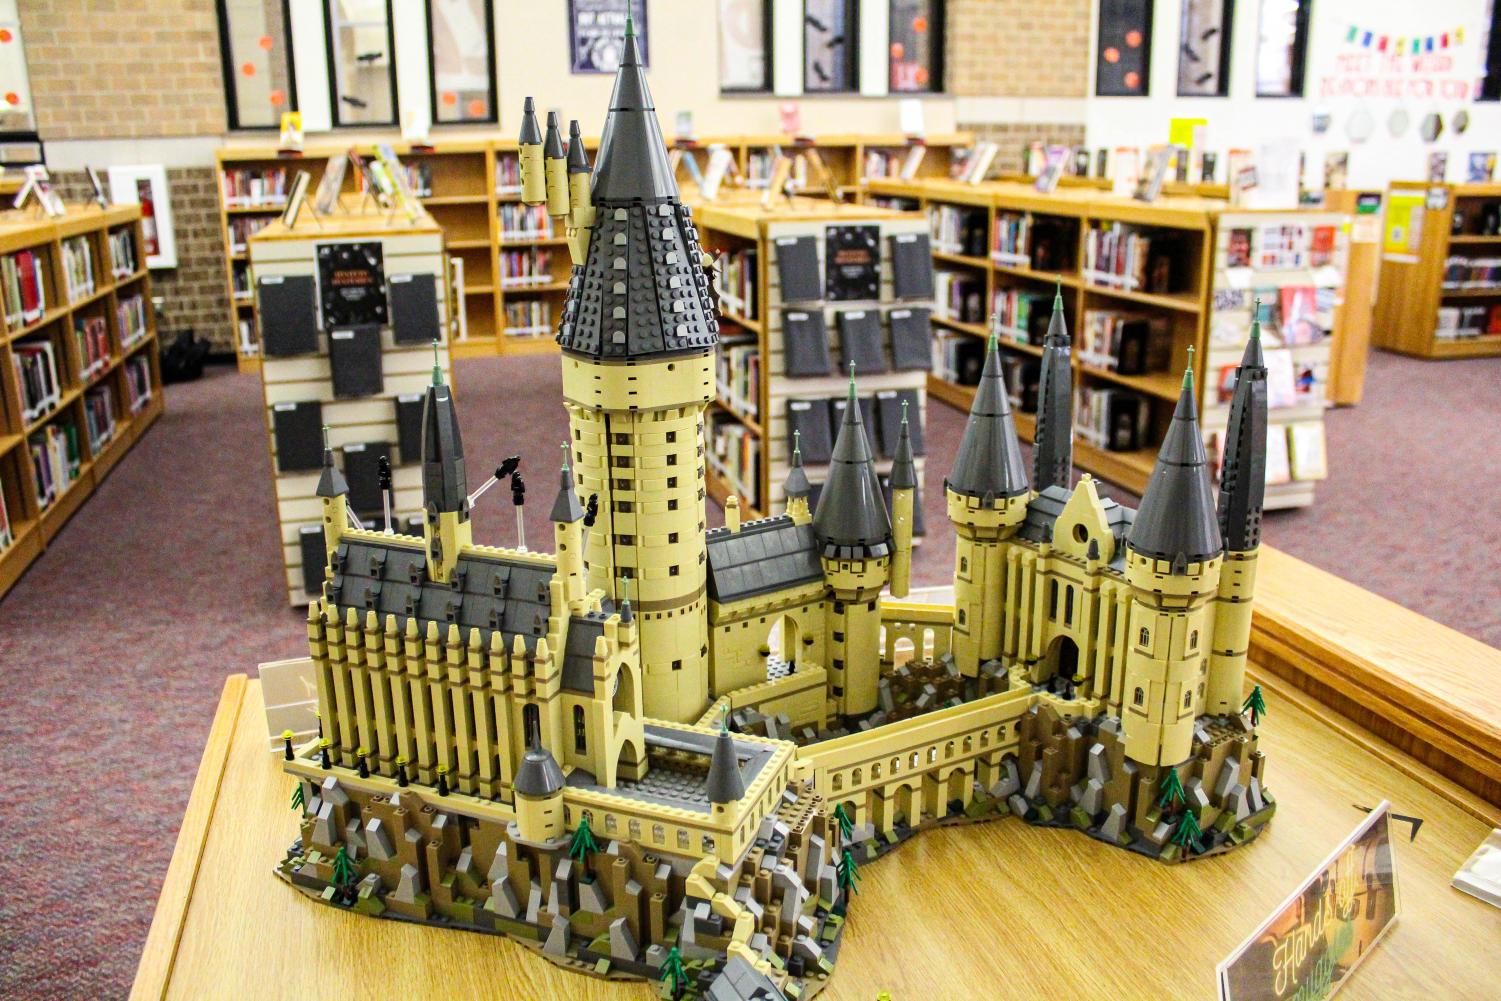 Piece+by+piece%2C+a+mini+world+of+wizardry+comes+to+life+in+library